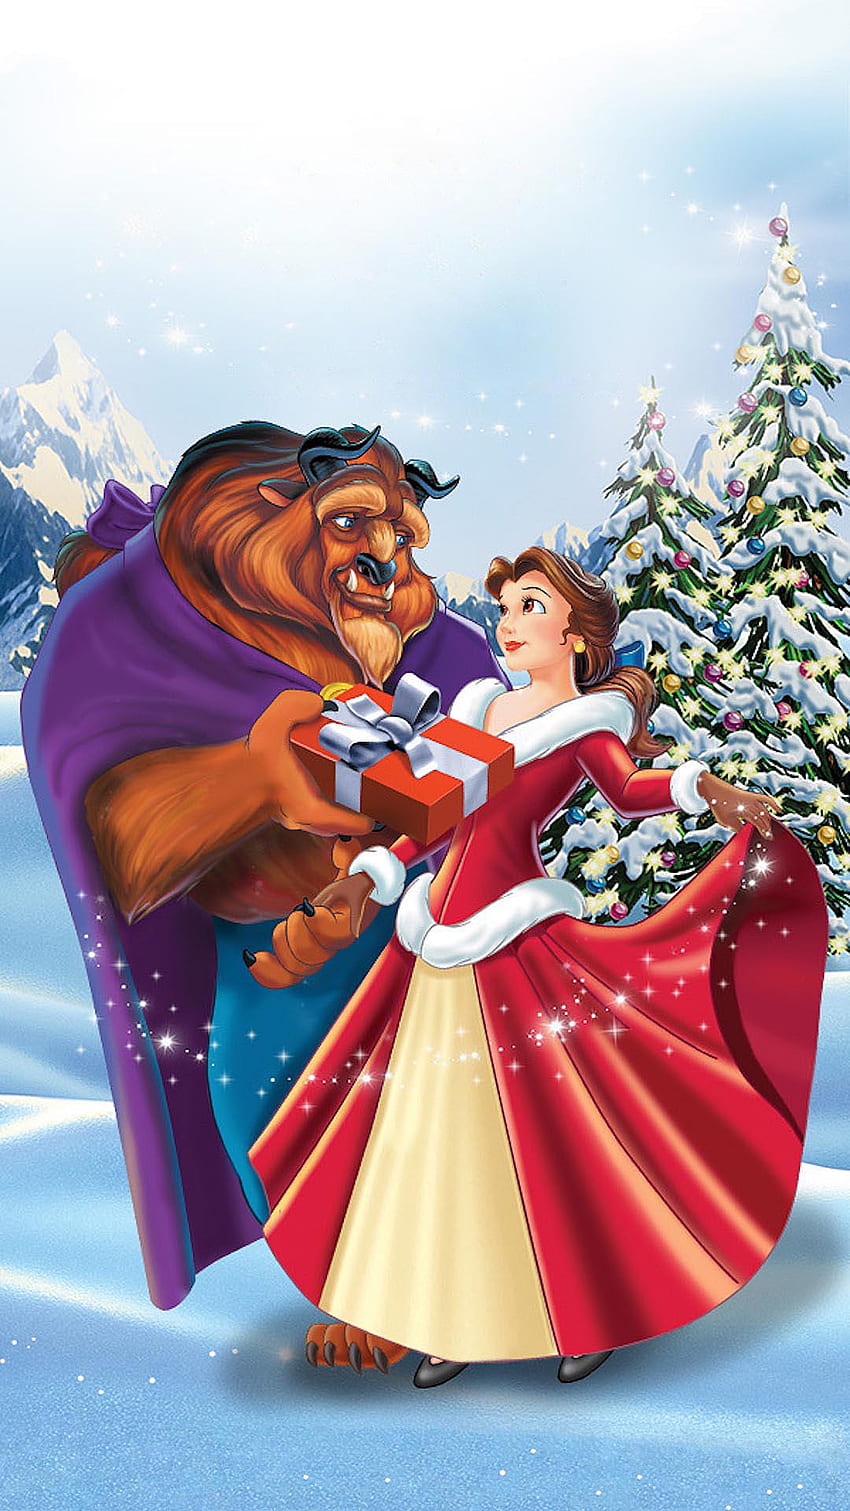 Download Beauty And The Beast Wallpaper